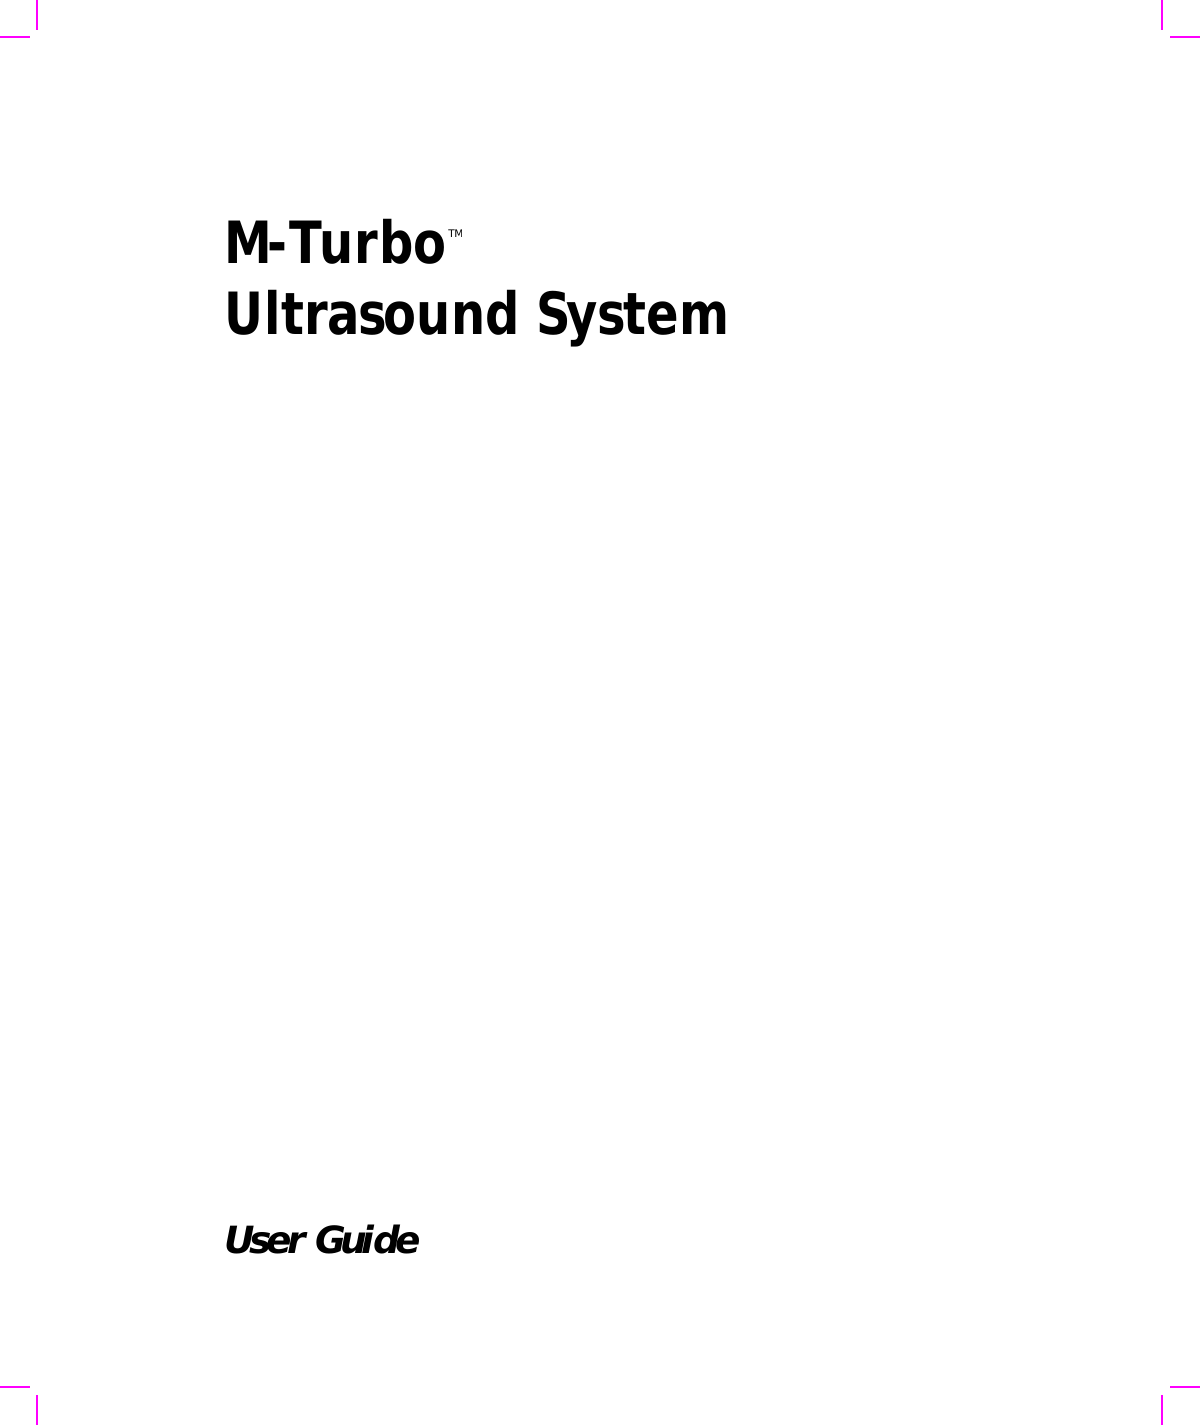 M-TurboUltrasound SystemUser GuideTM